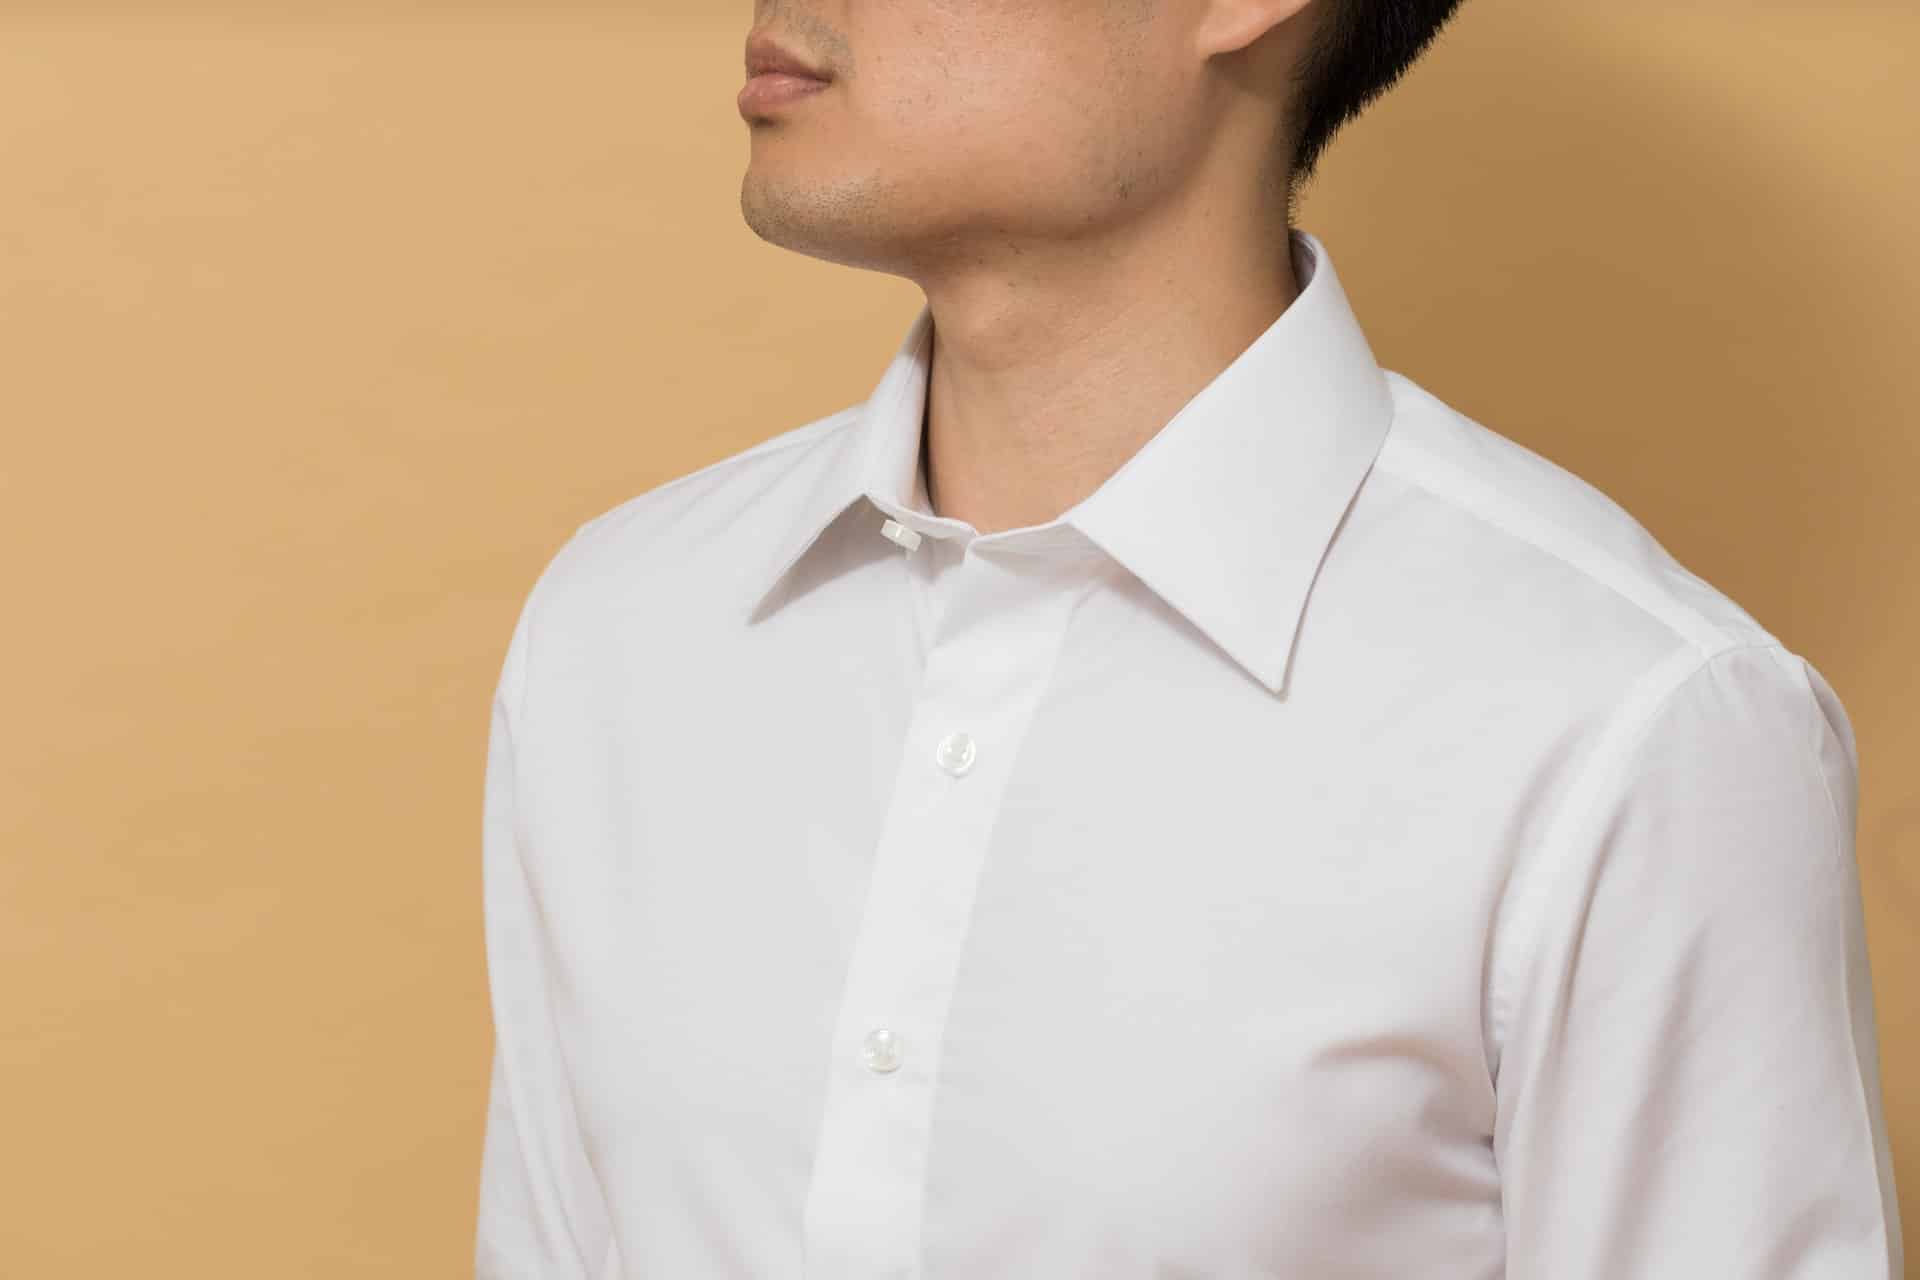 Images of a man in a white collared shirt against orange background - What are white collar crimes